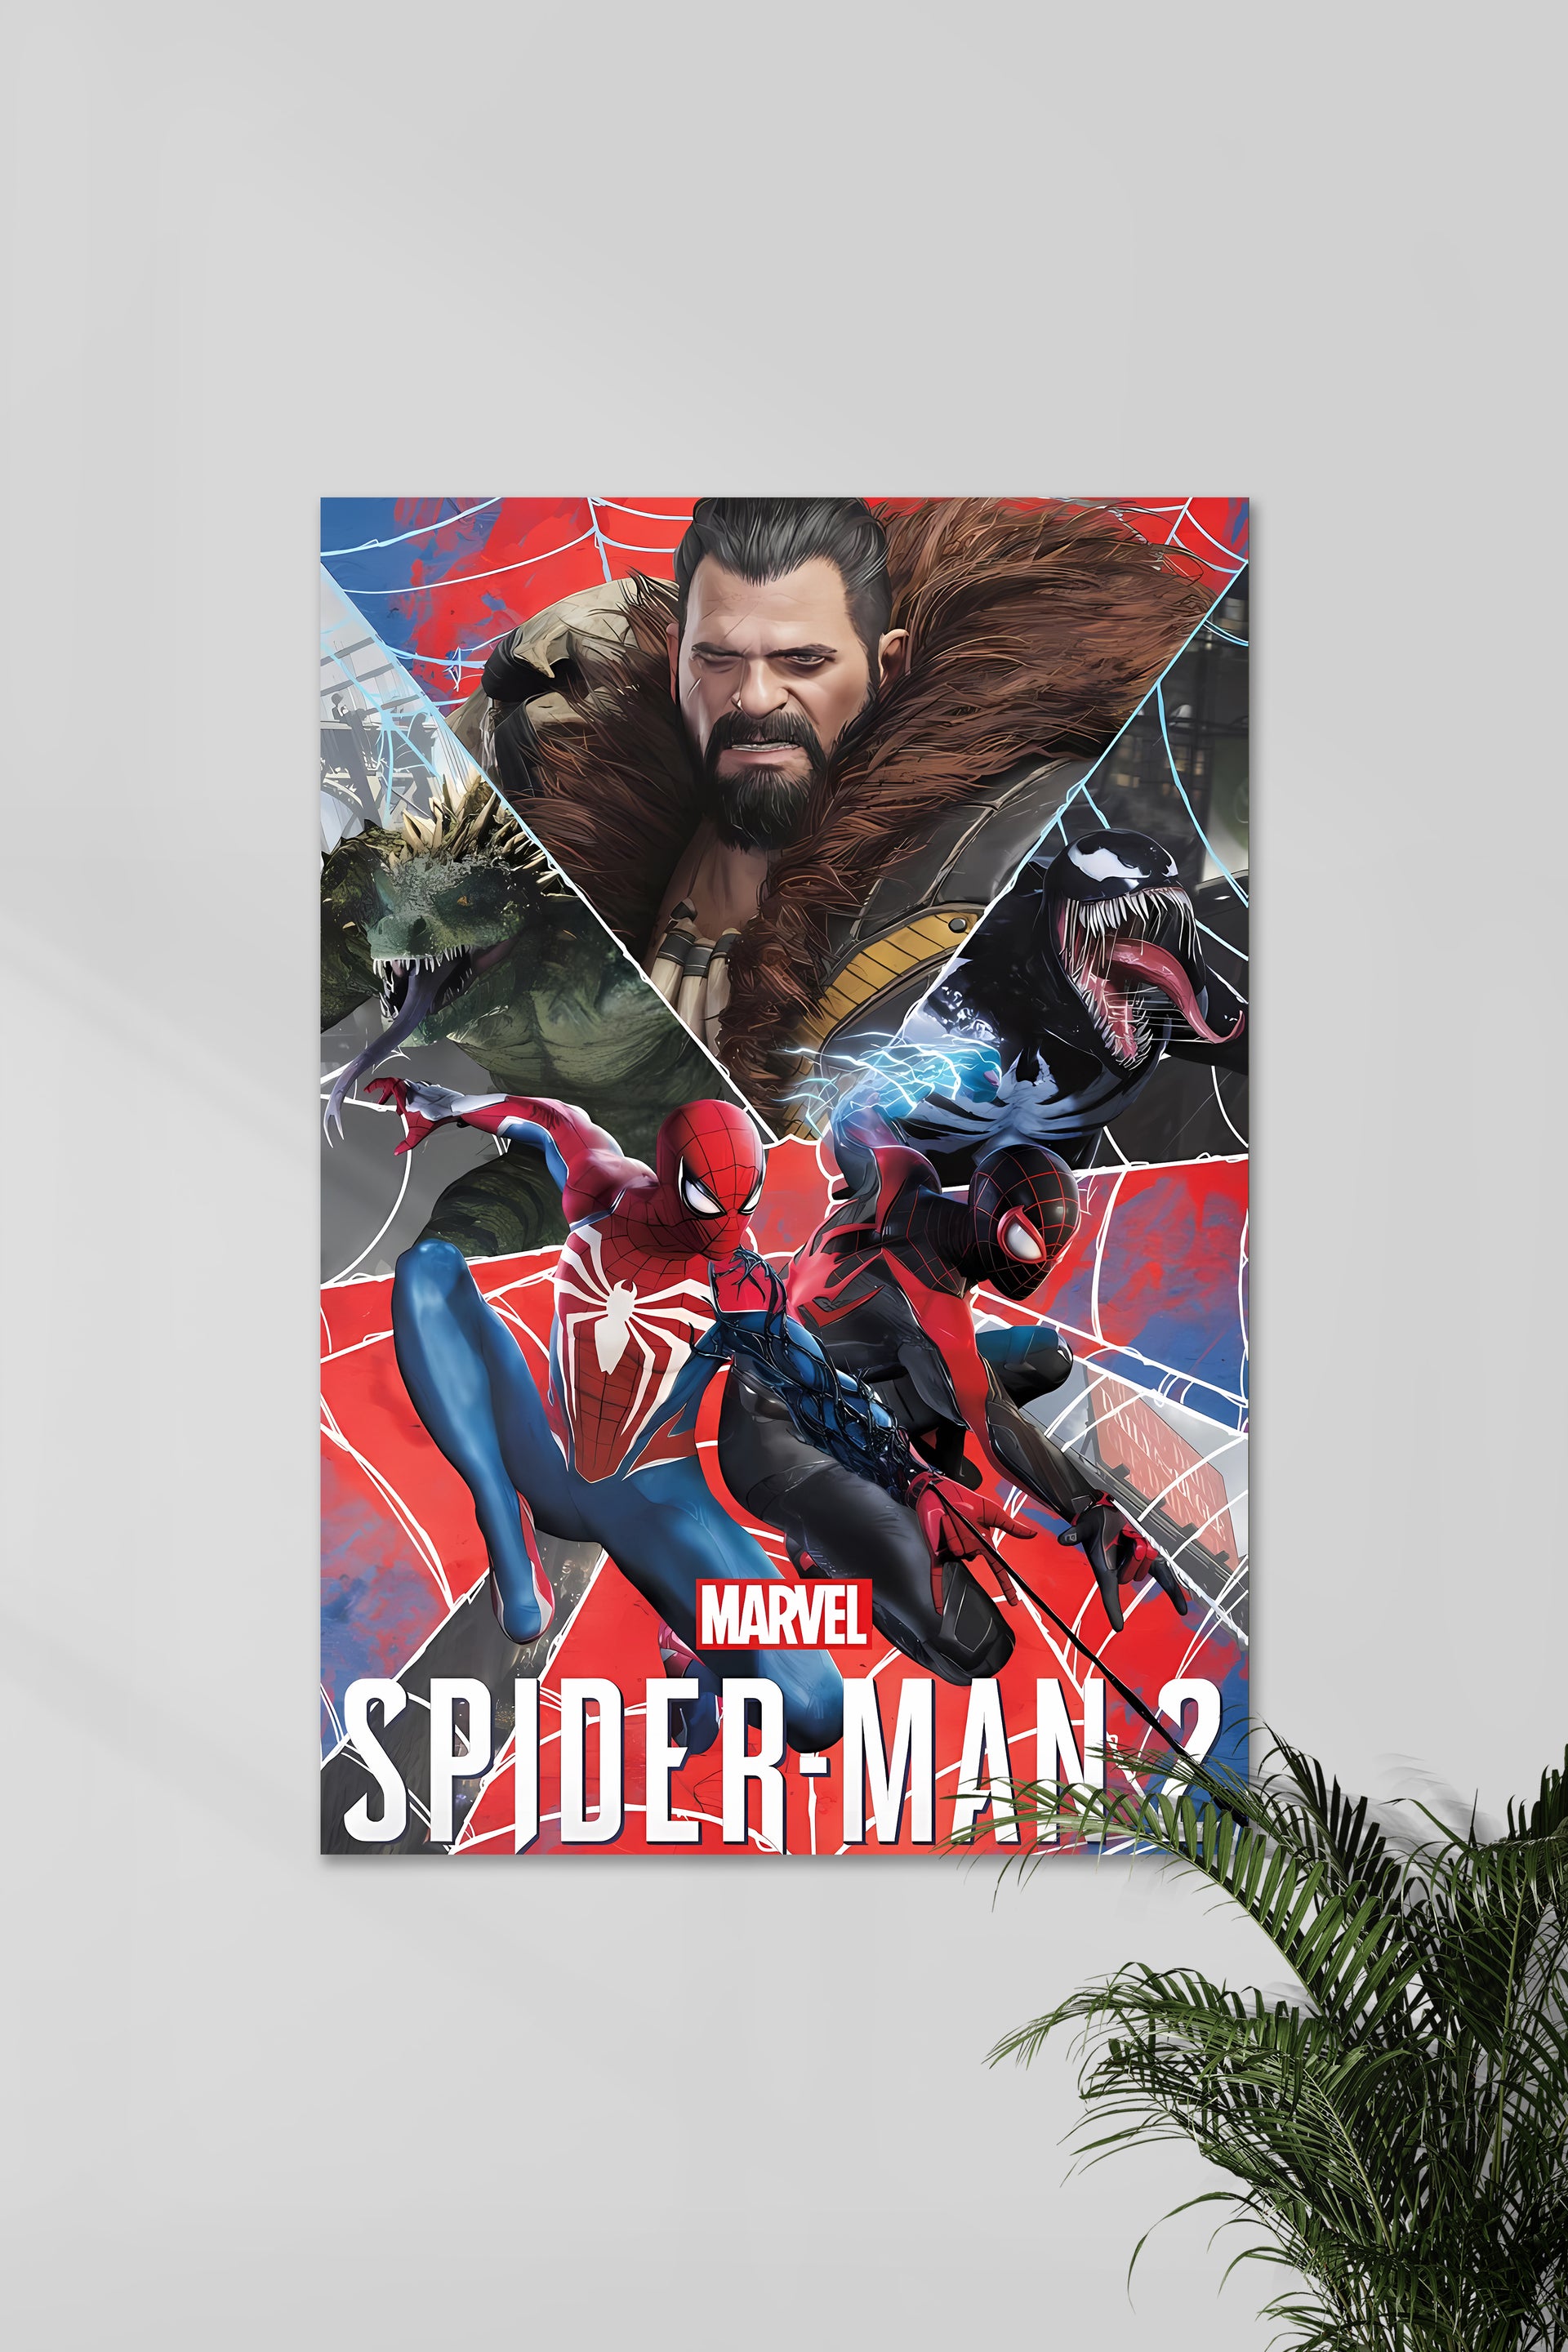 SPIDER-MAN 2 PS4 COVER BOX GAME, FILM BIONICX